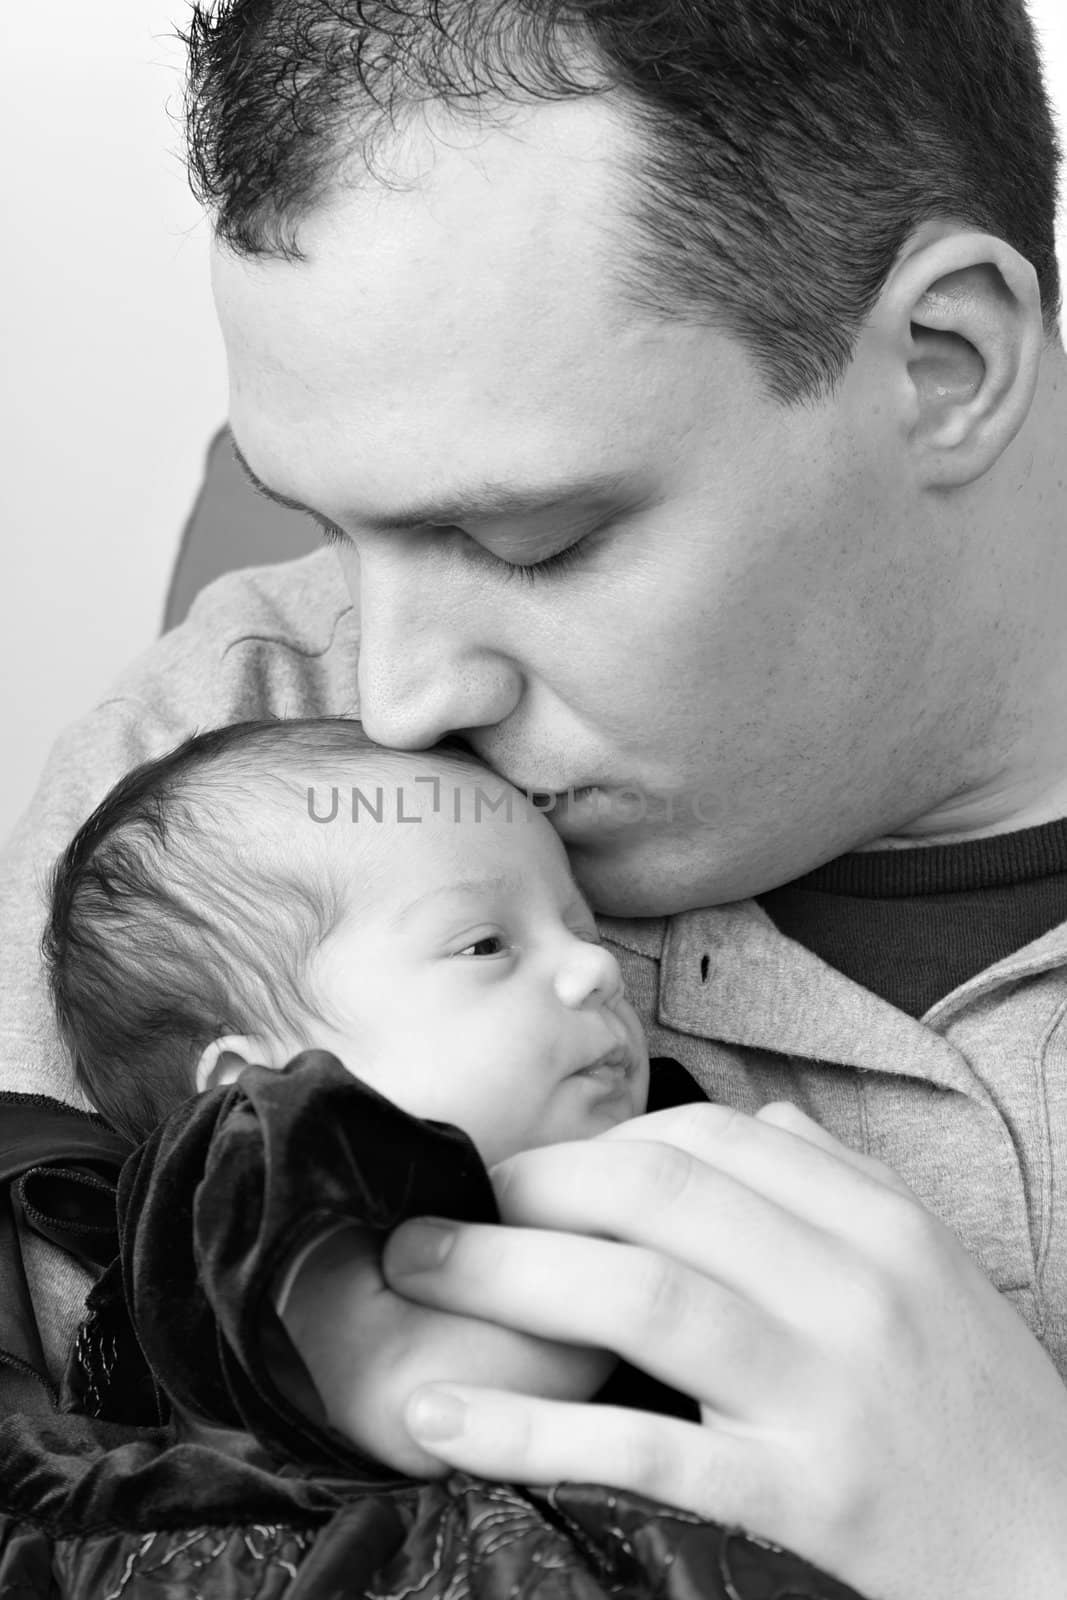 A newborn baby girl being by her dad as he kisses her head in black and white.